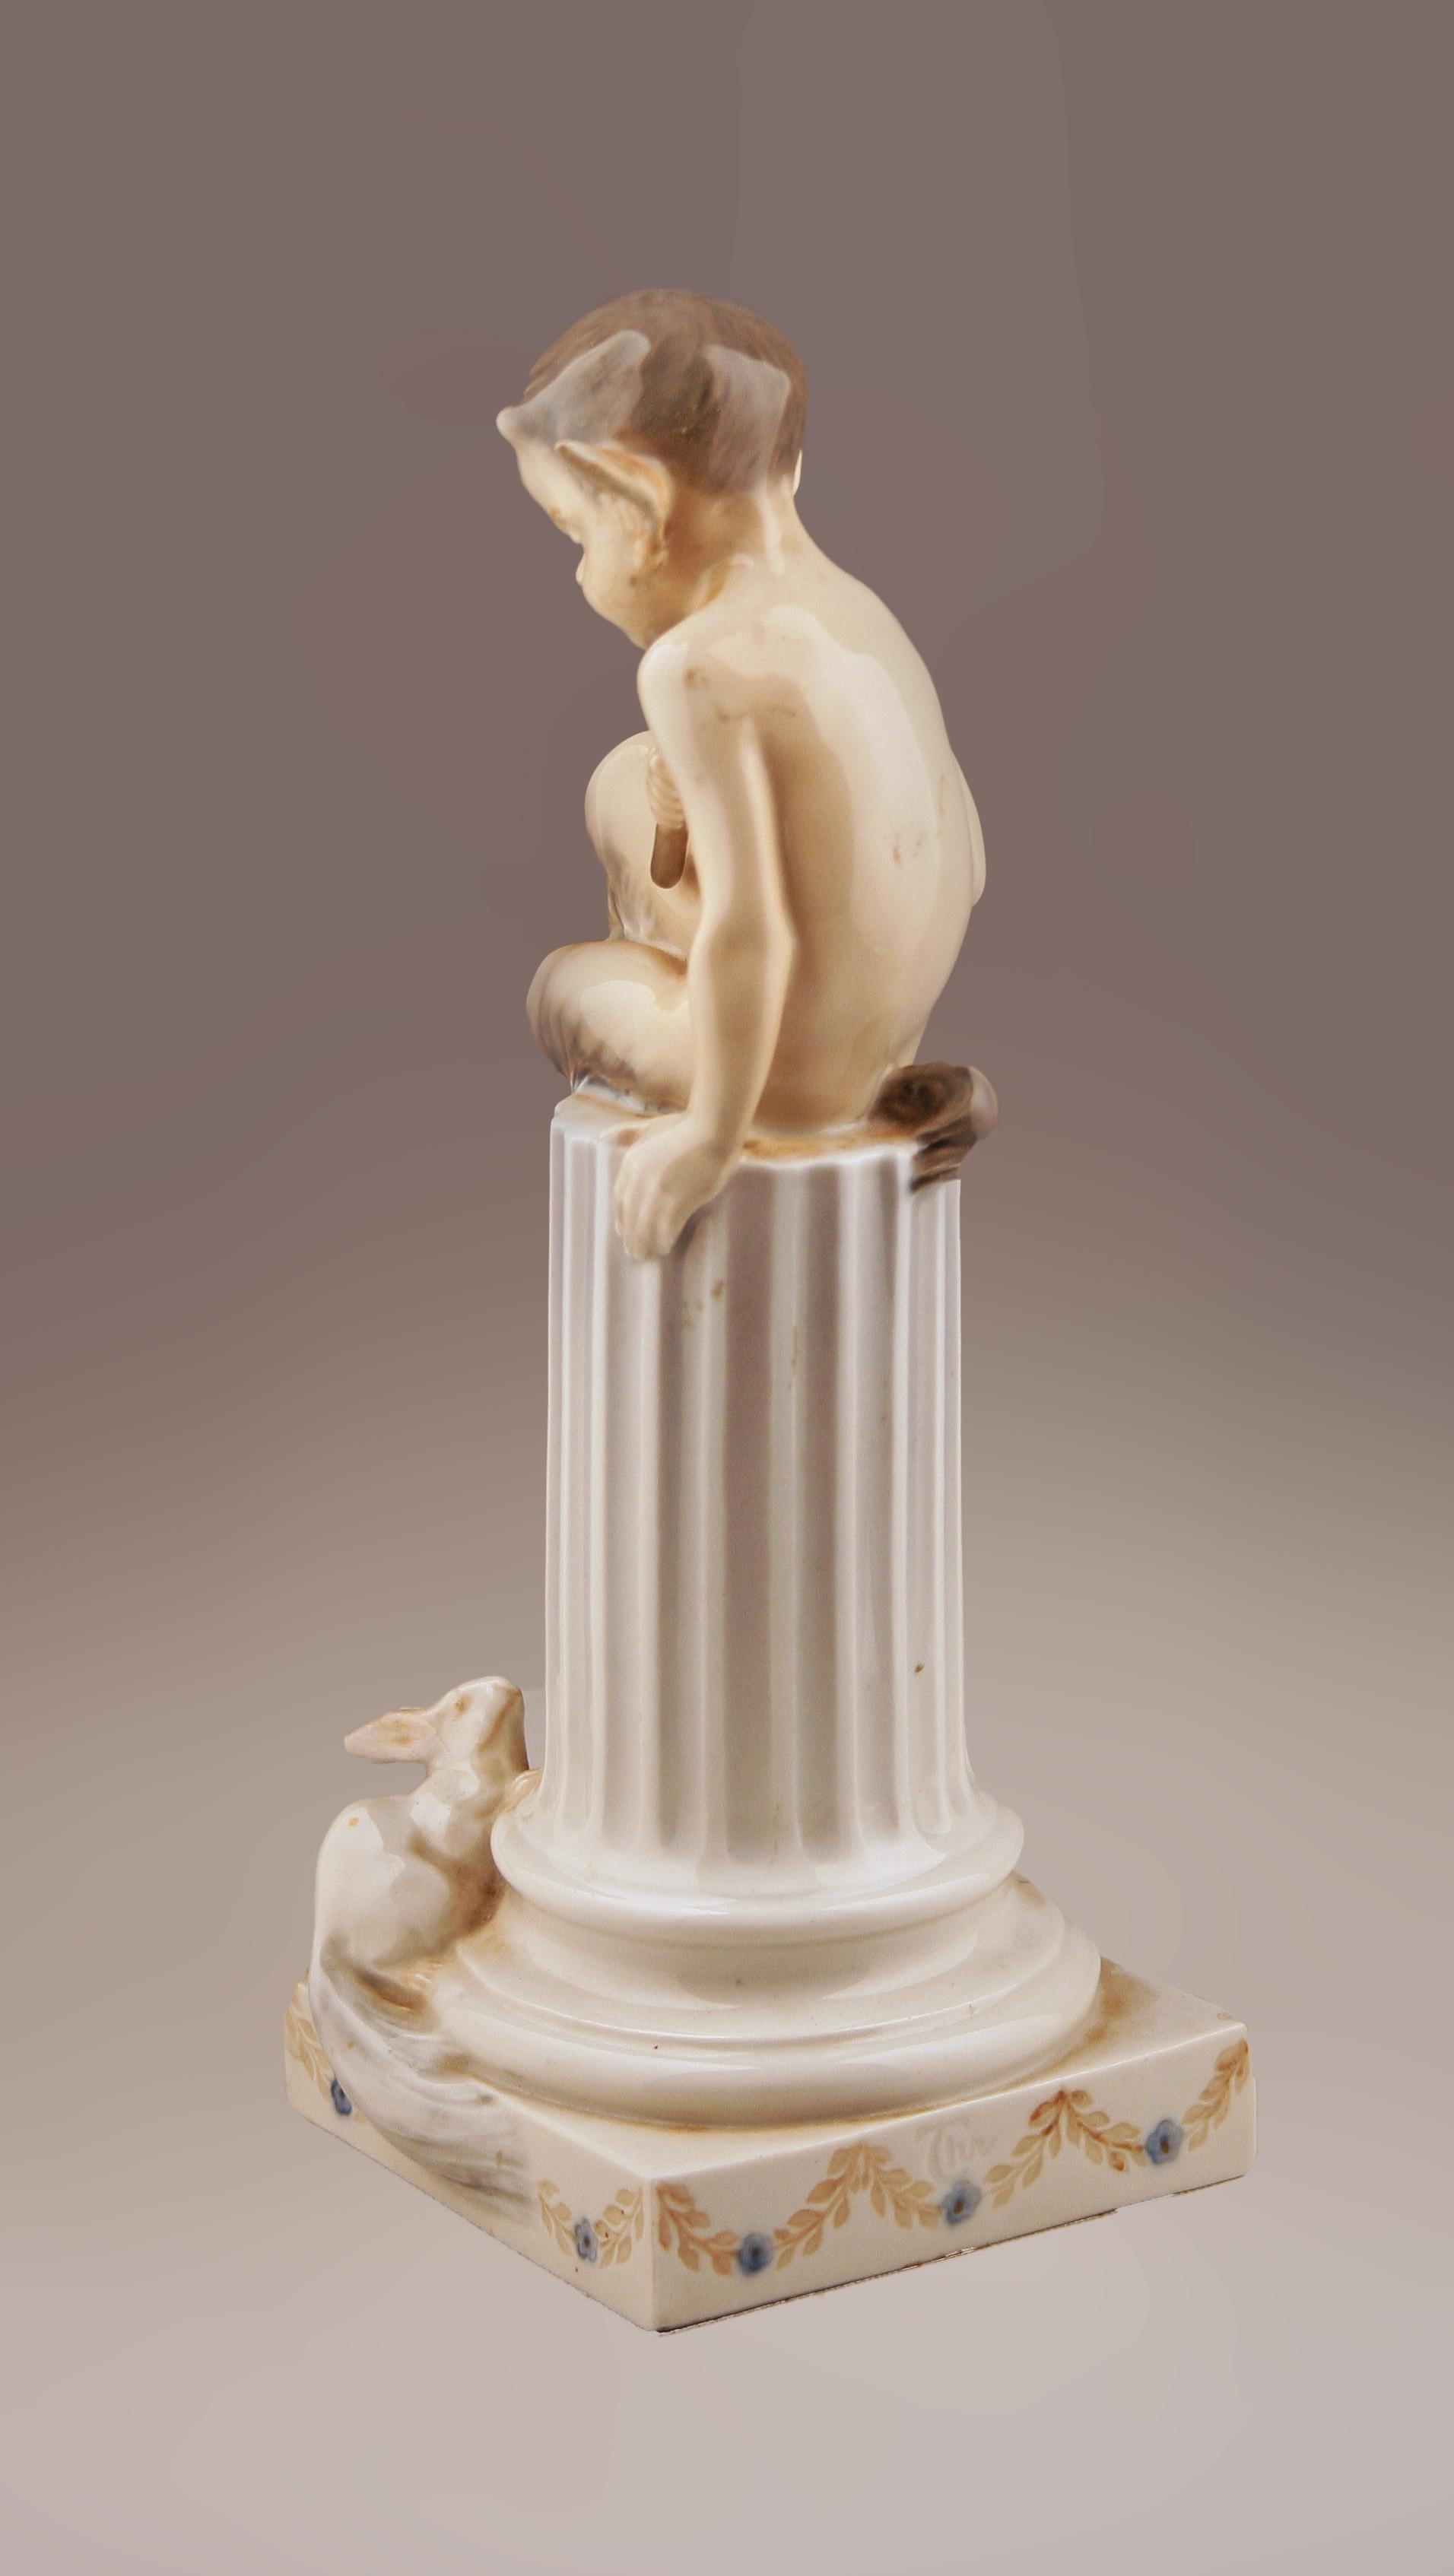 Danish Mid-20th Century Porcelain Sculpture of Faun and a Rabbit by Royal Copenhagen For Sale